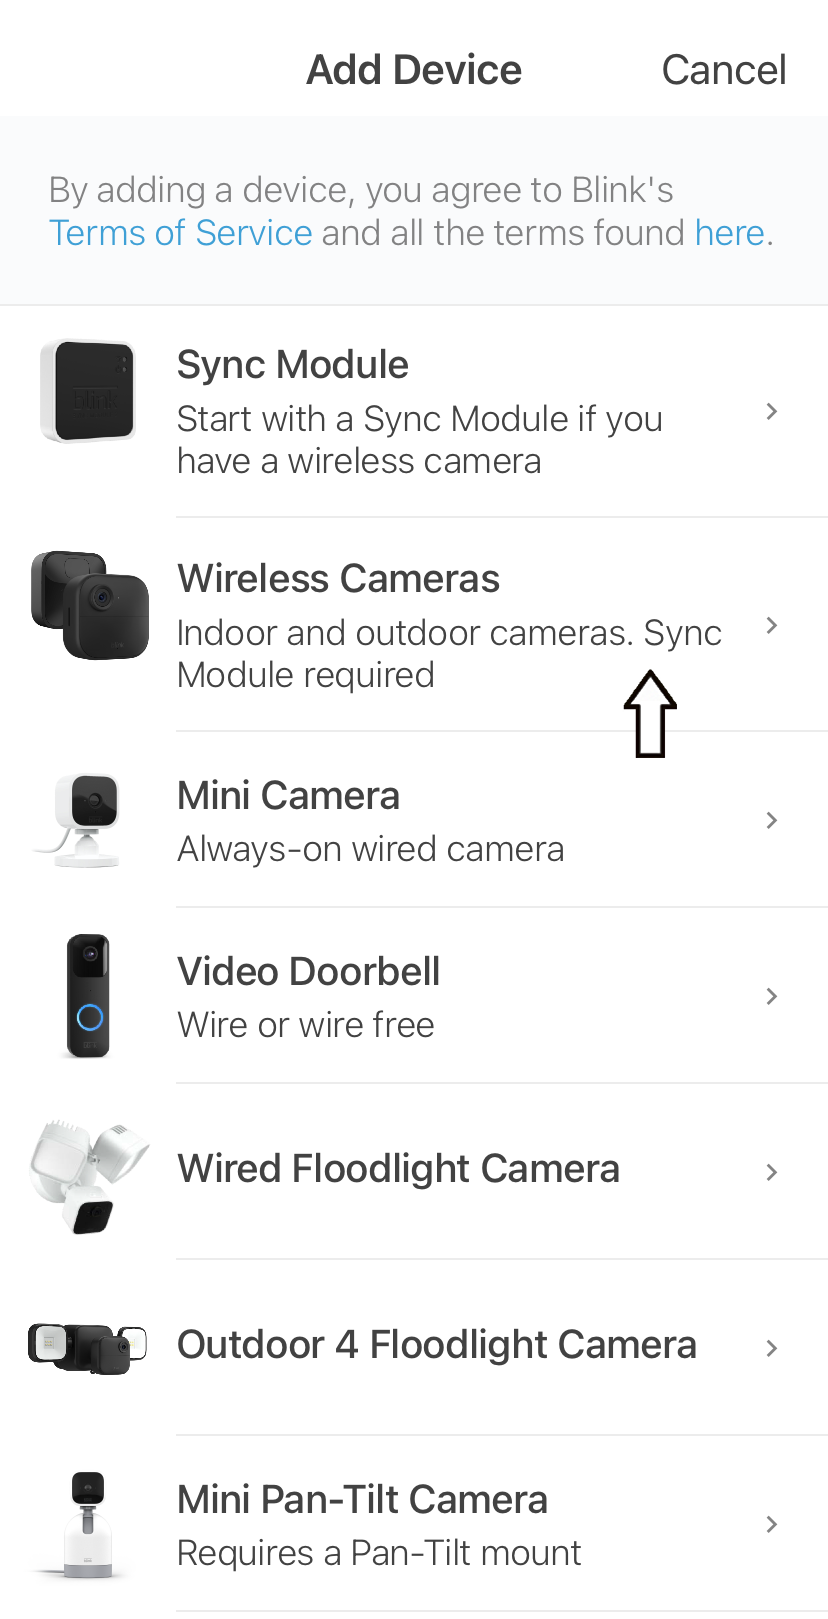 How to Add Camera to Blink Sync Module 2